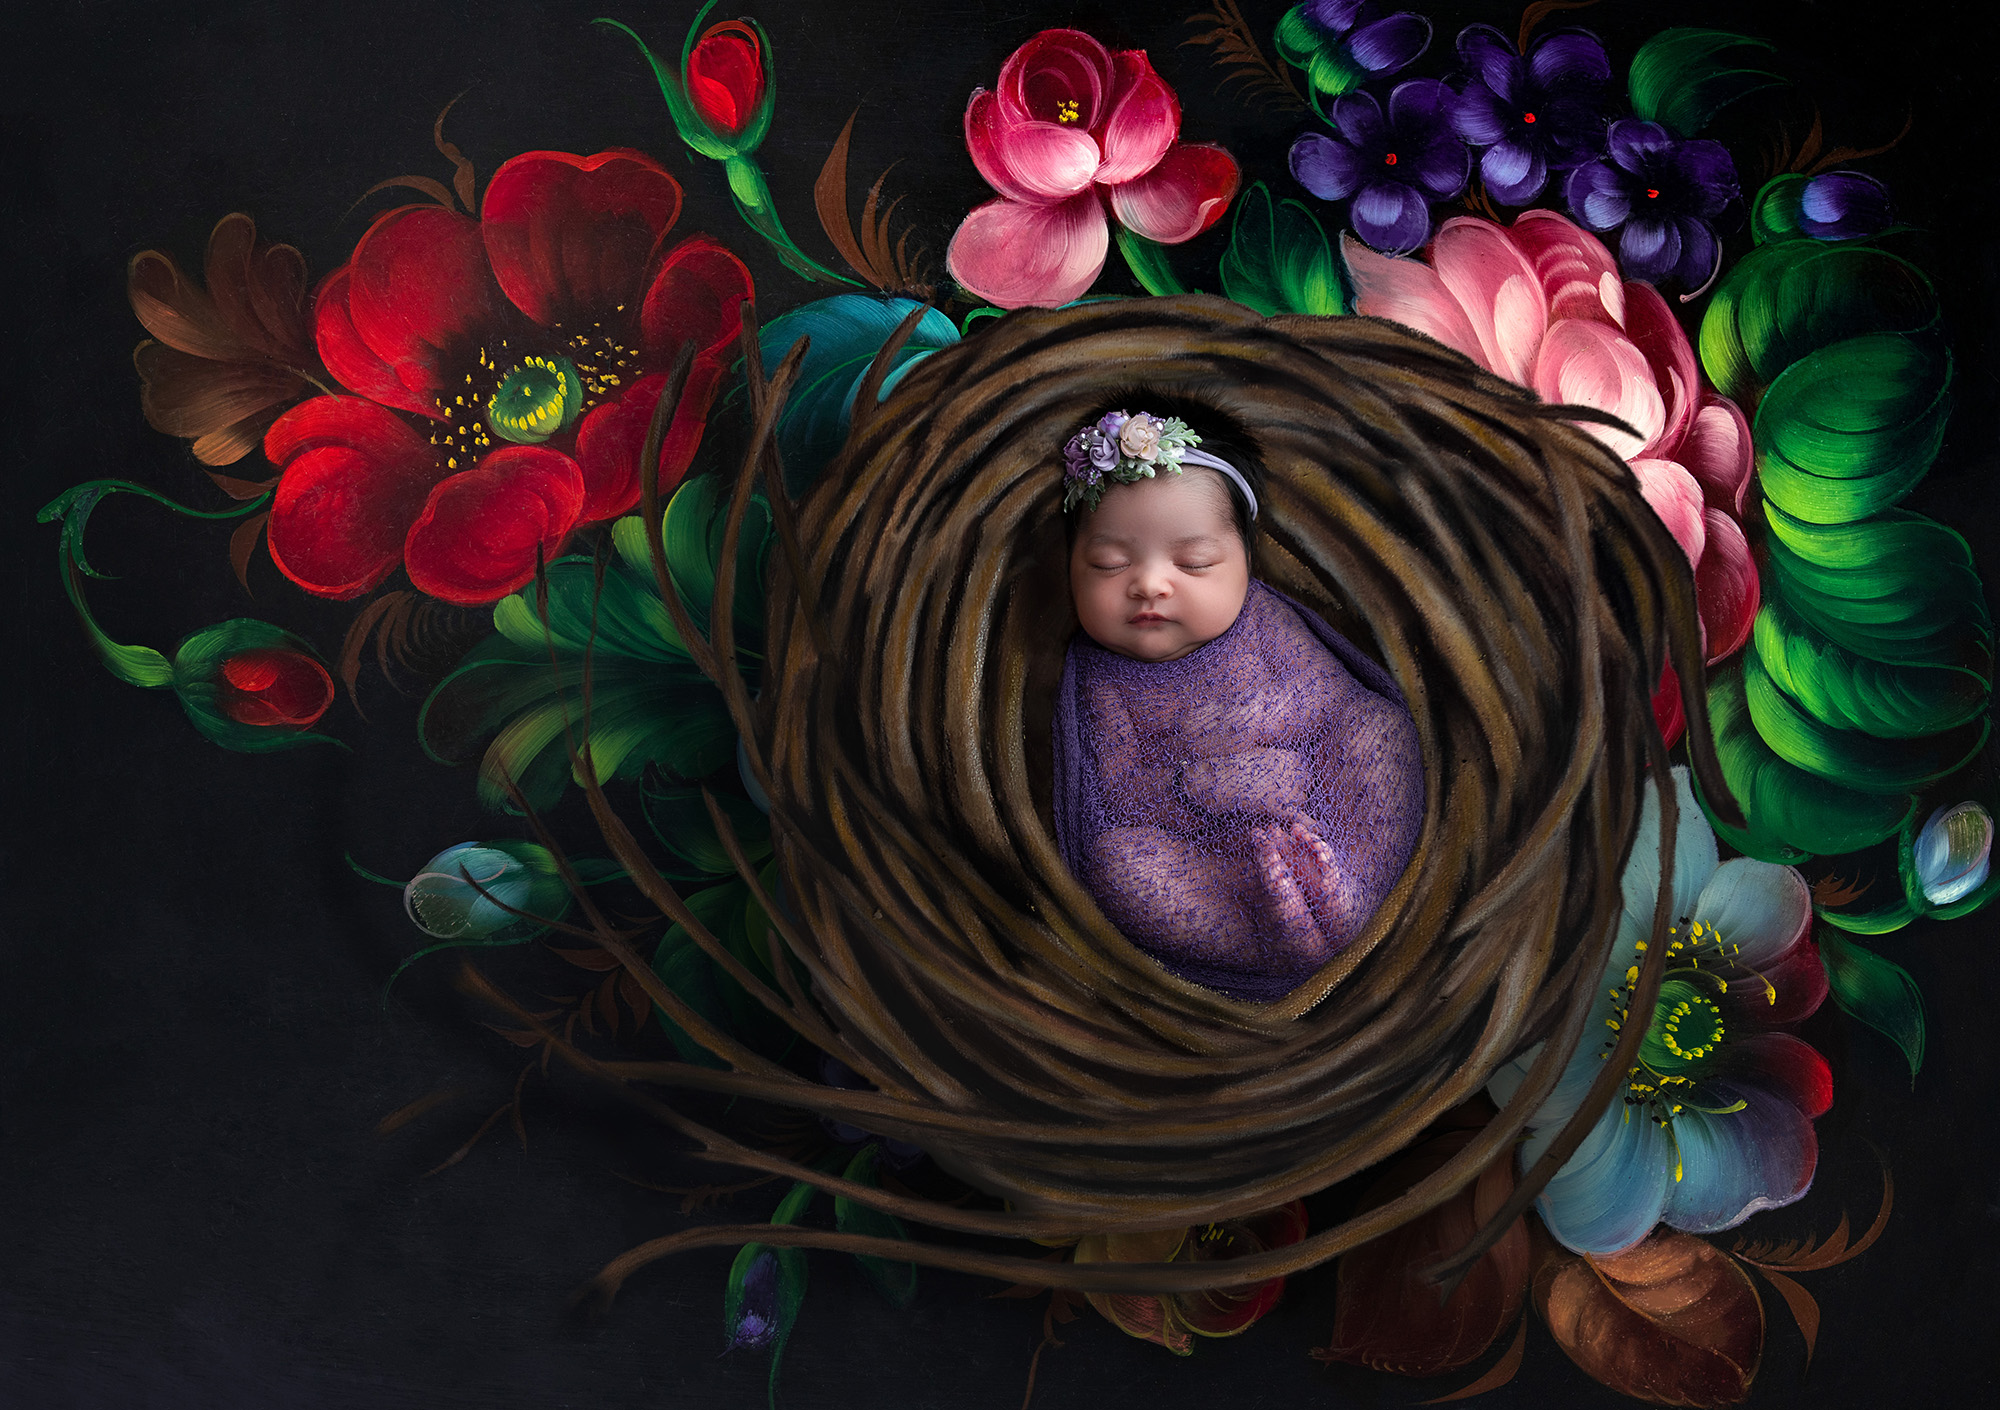 Newborn Photos Full of Color newborn baby girl asleep swaddled in purple inside wooden wreath with vibrant floral background